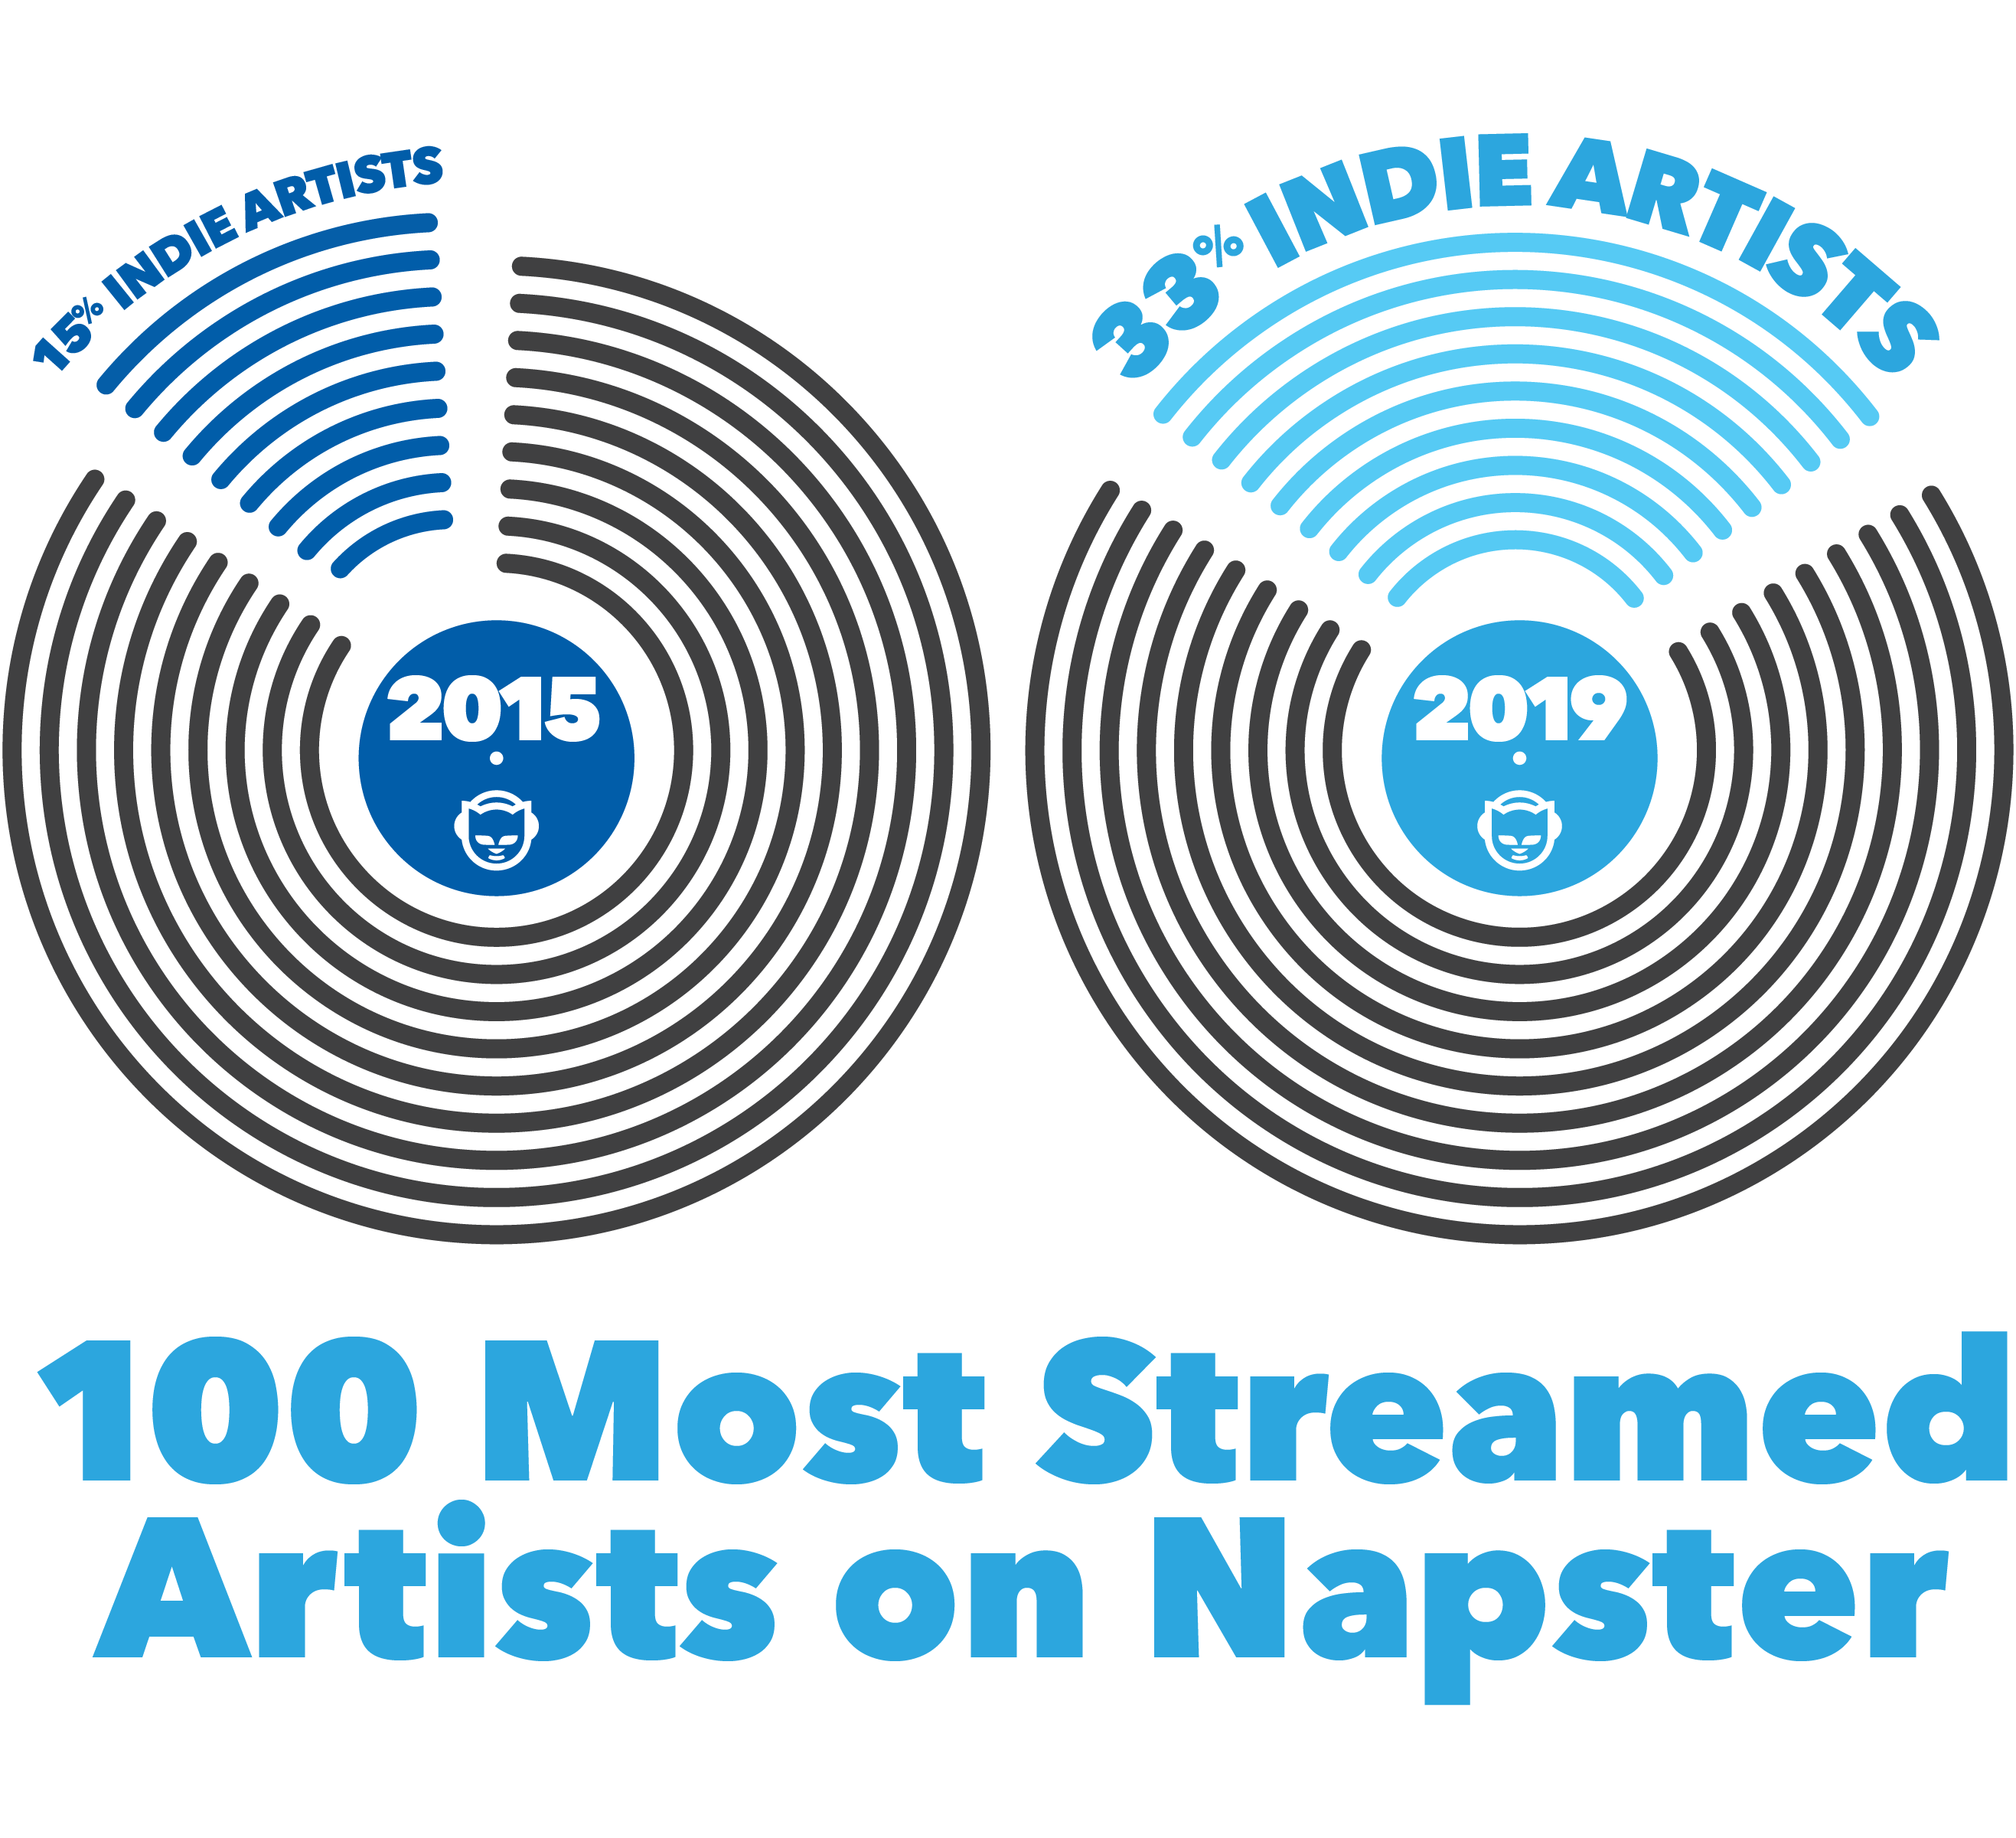 Indie artists now make up 1/3 of Napster’s most streamed artists